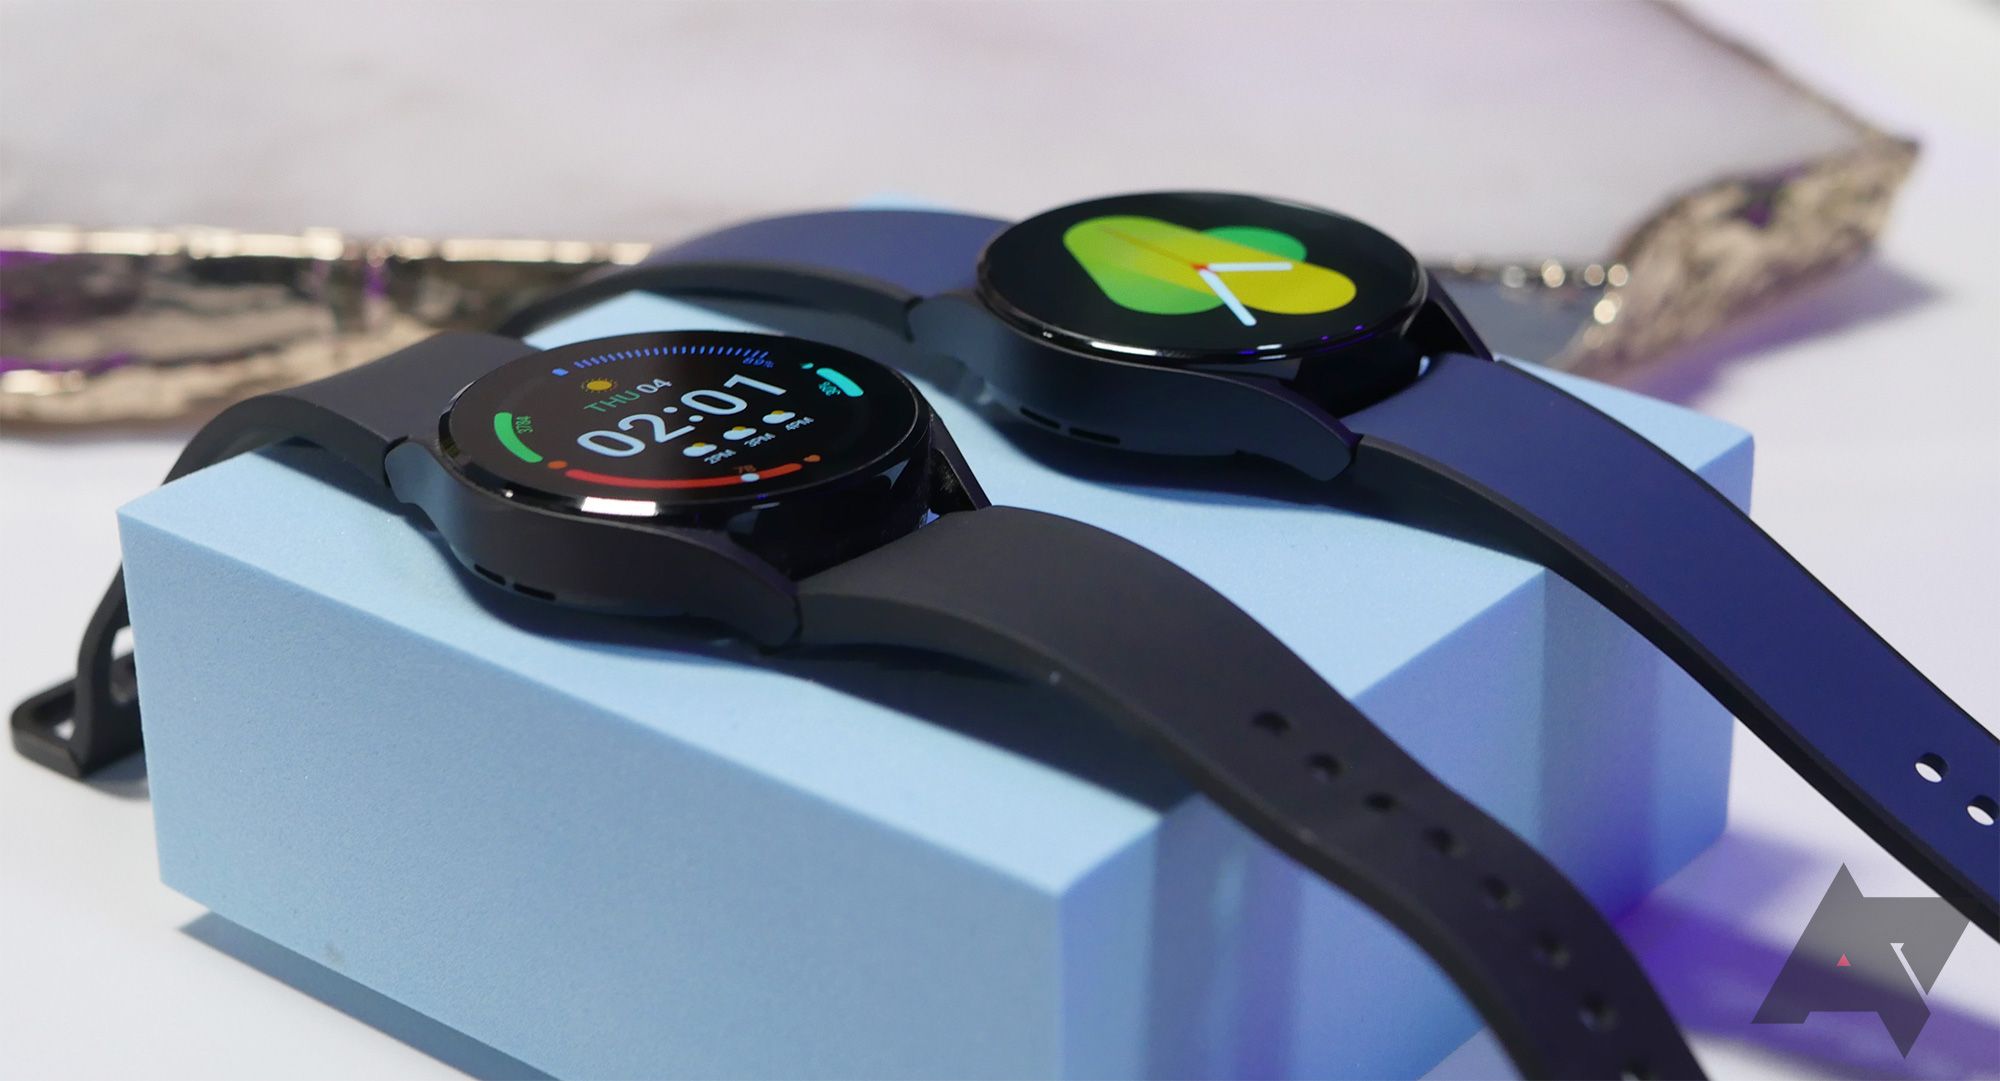 A comparison of the Samsung Galaxy Watch 4 and the Galaxy Watch 5